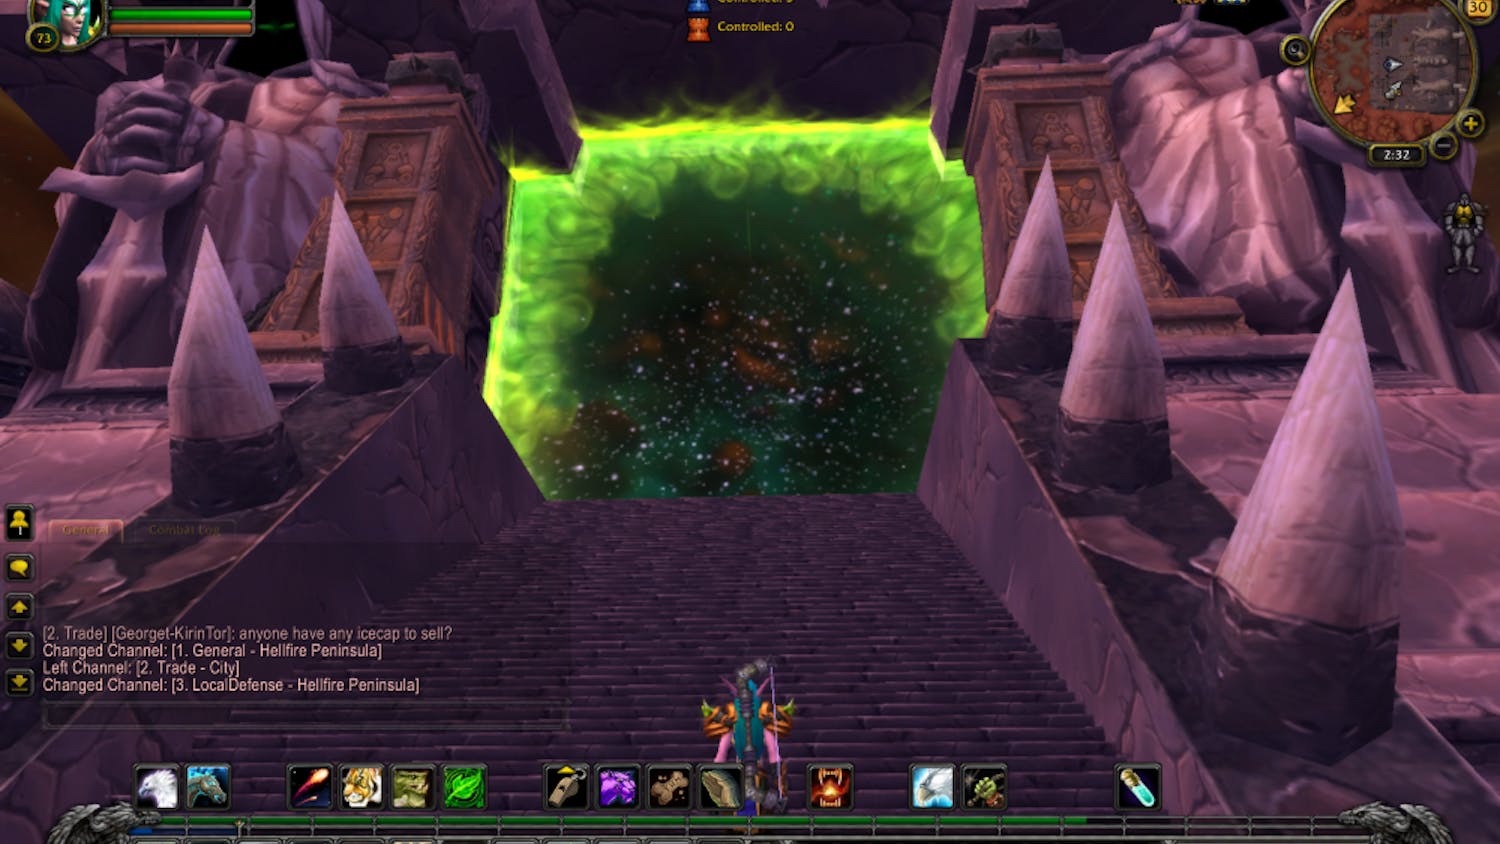 To put things in perspective, this portal was the Burning Legion's&nbsp;invasion plan in 2007.